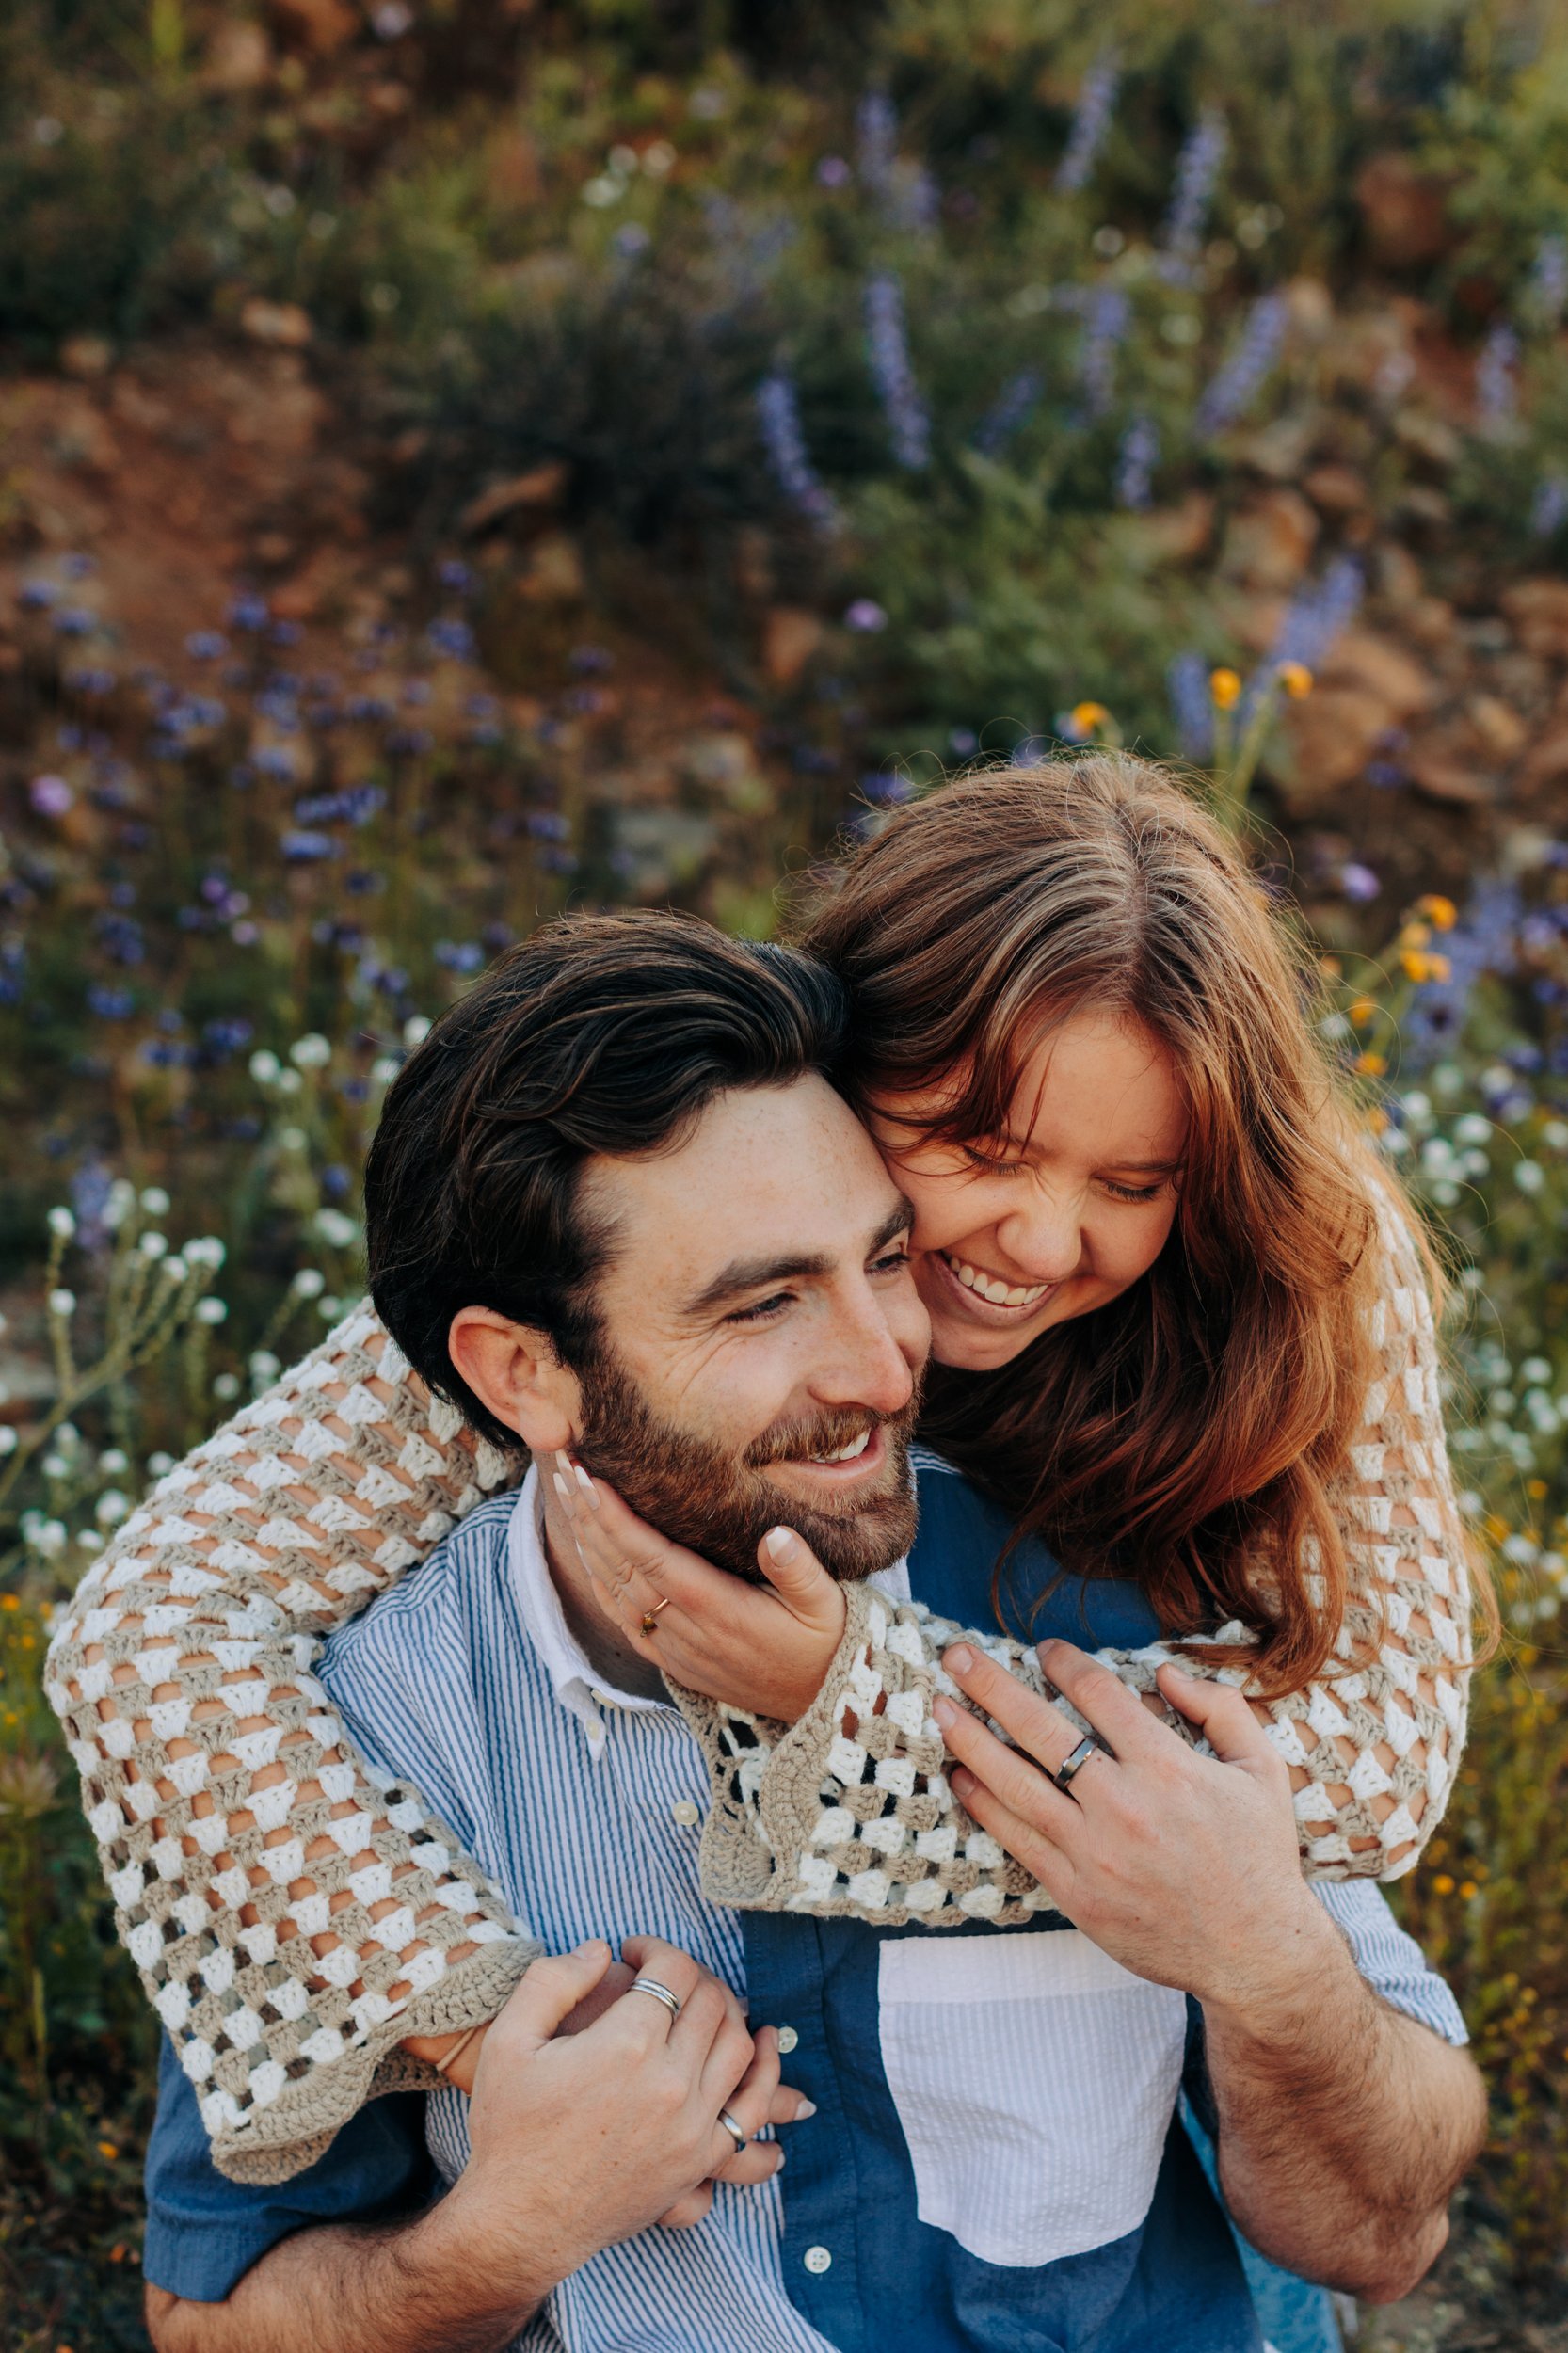 Couple embraces in a field of wildflowers